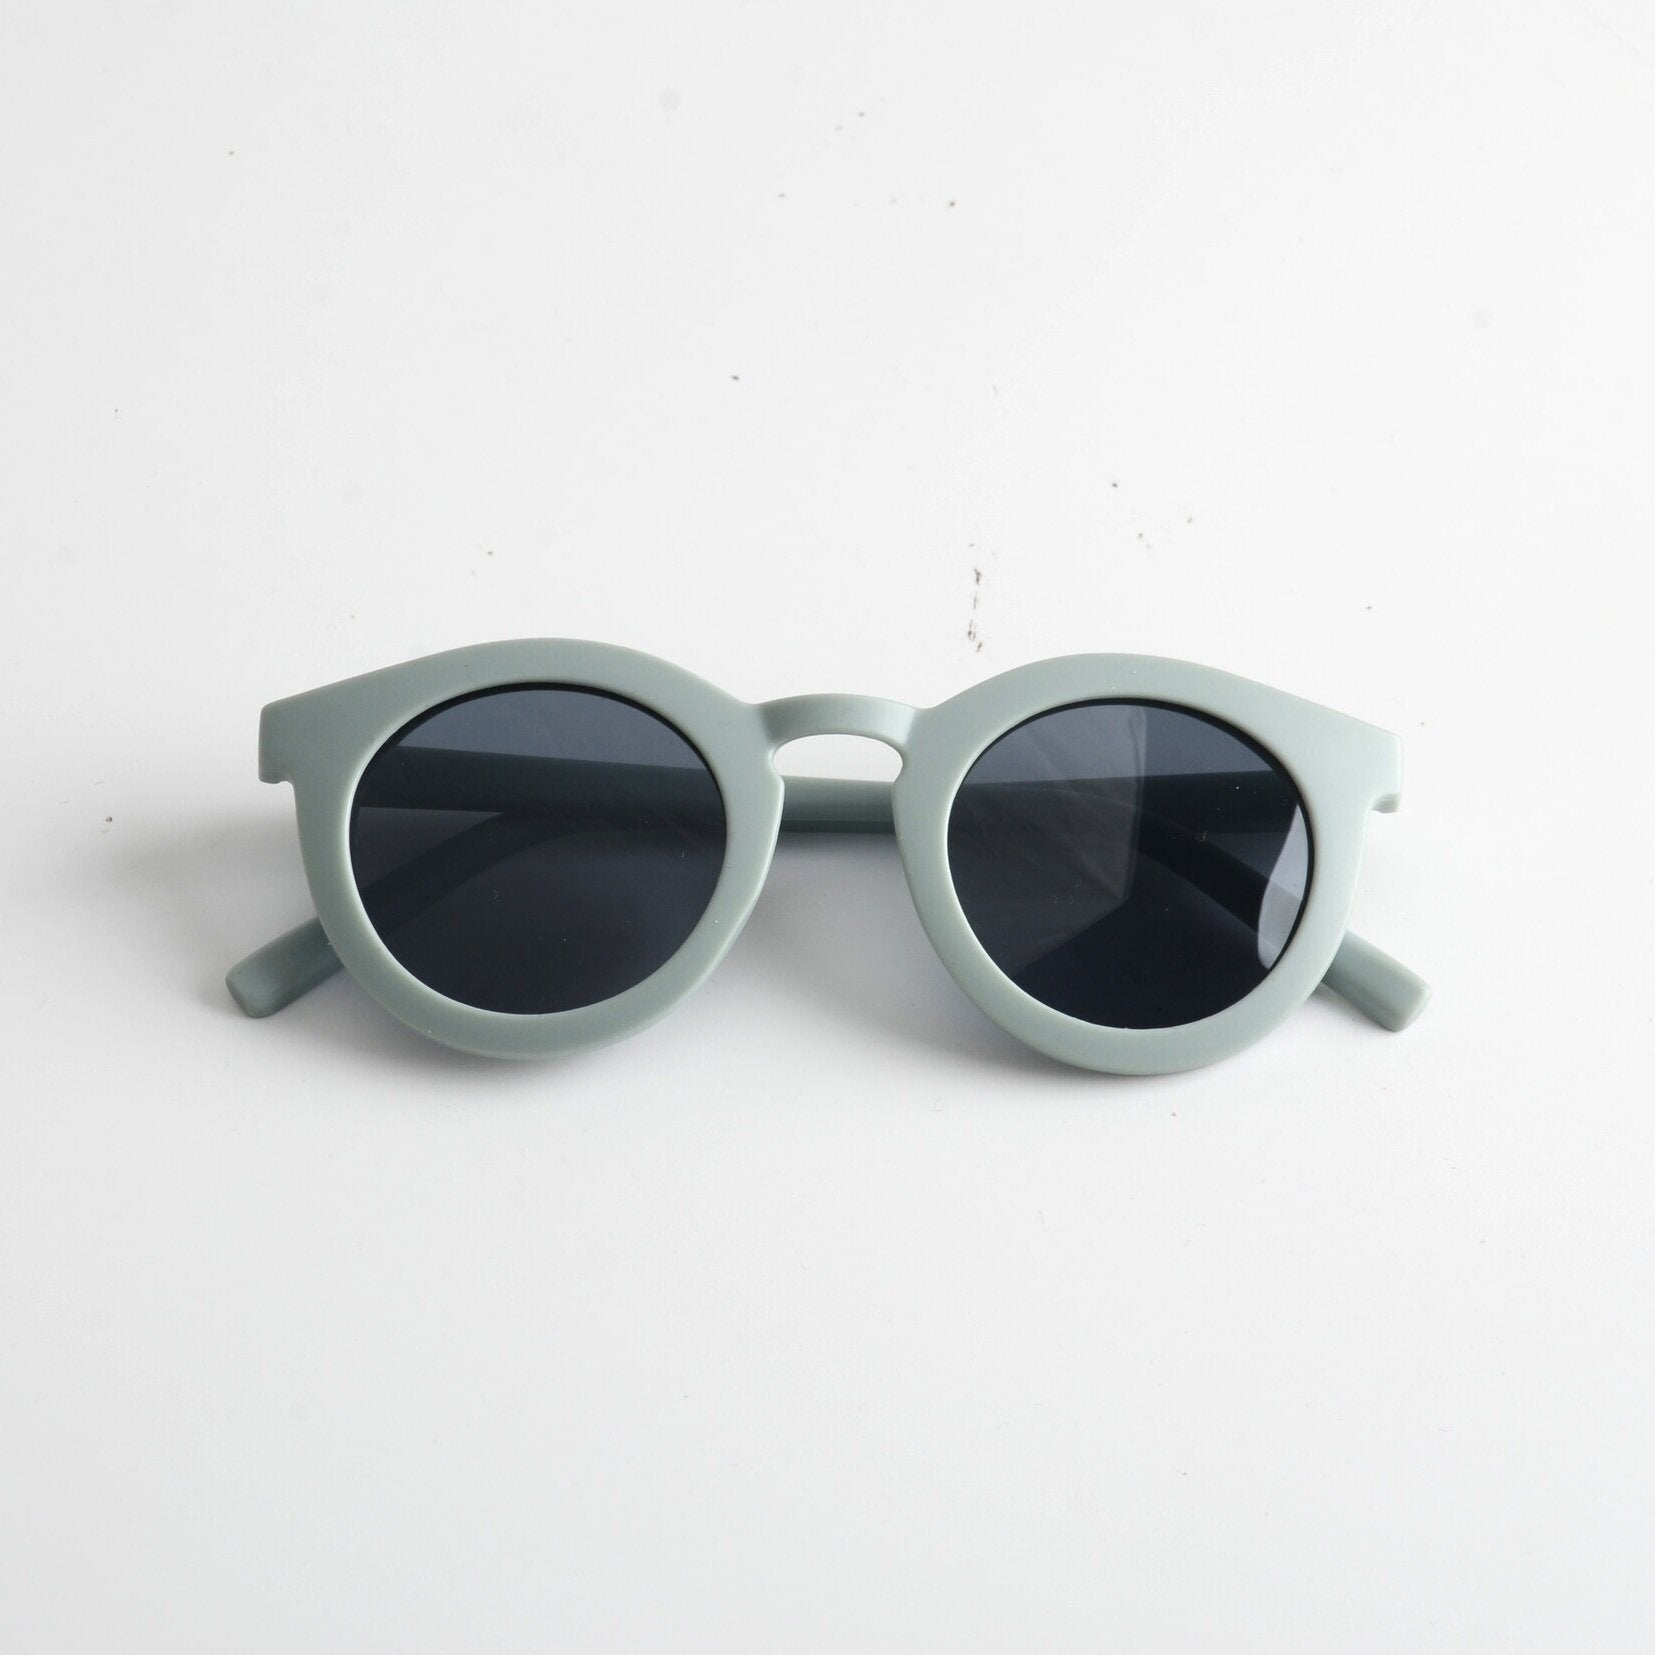 Grech and Co. Sustainable Sunglasses